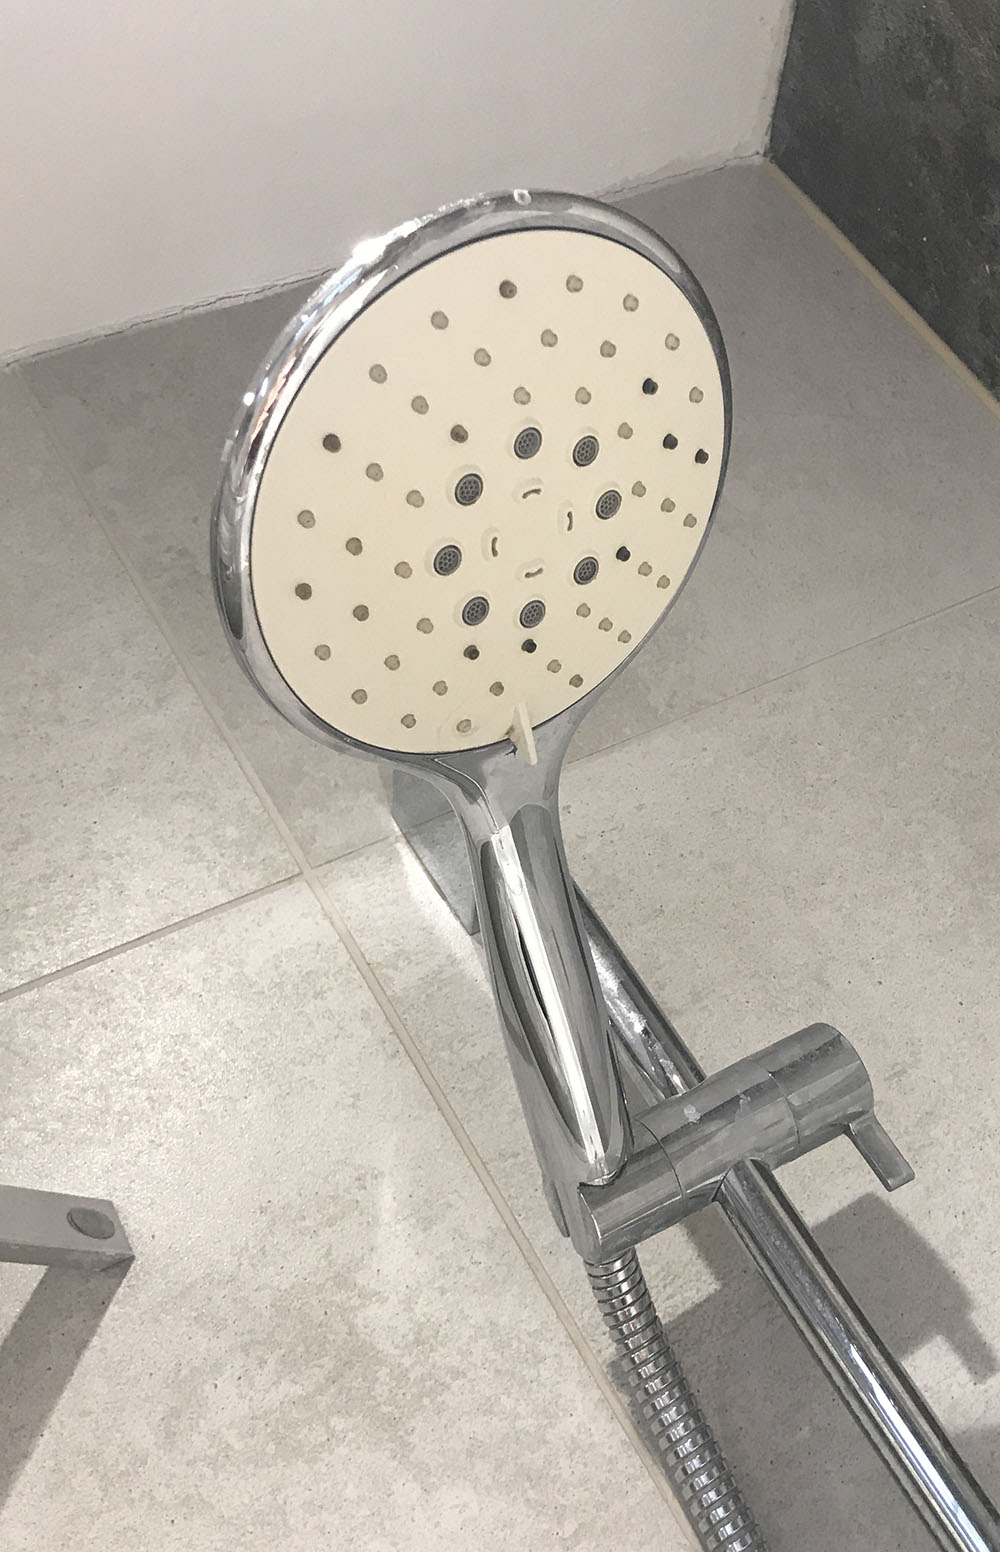 This is a photo of a shower